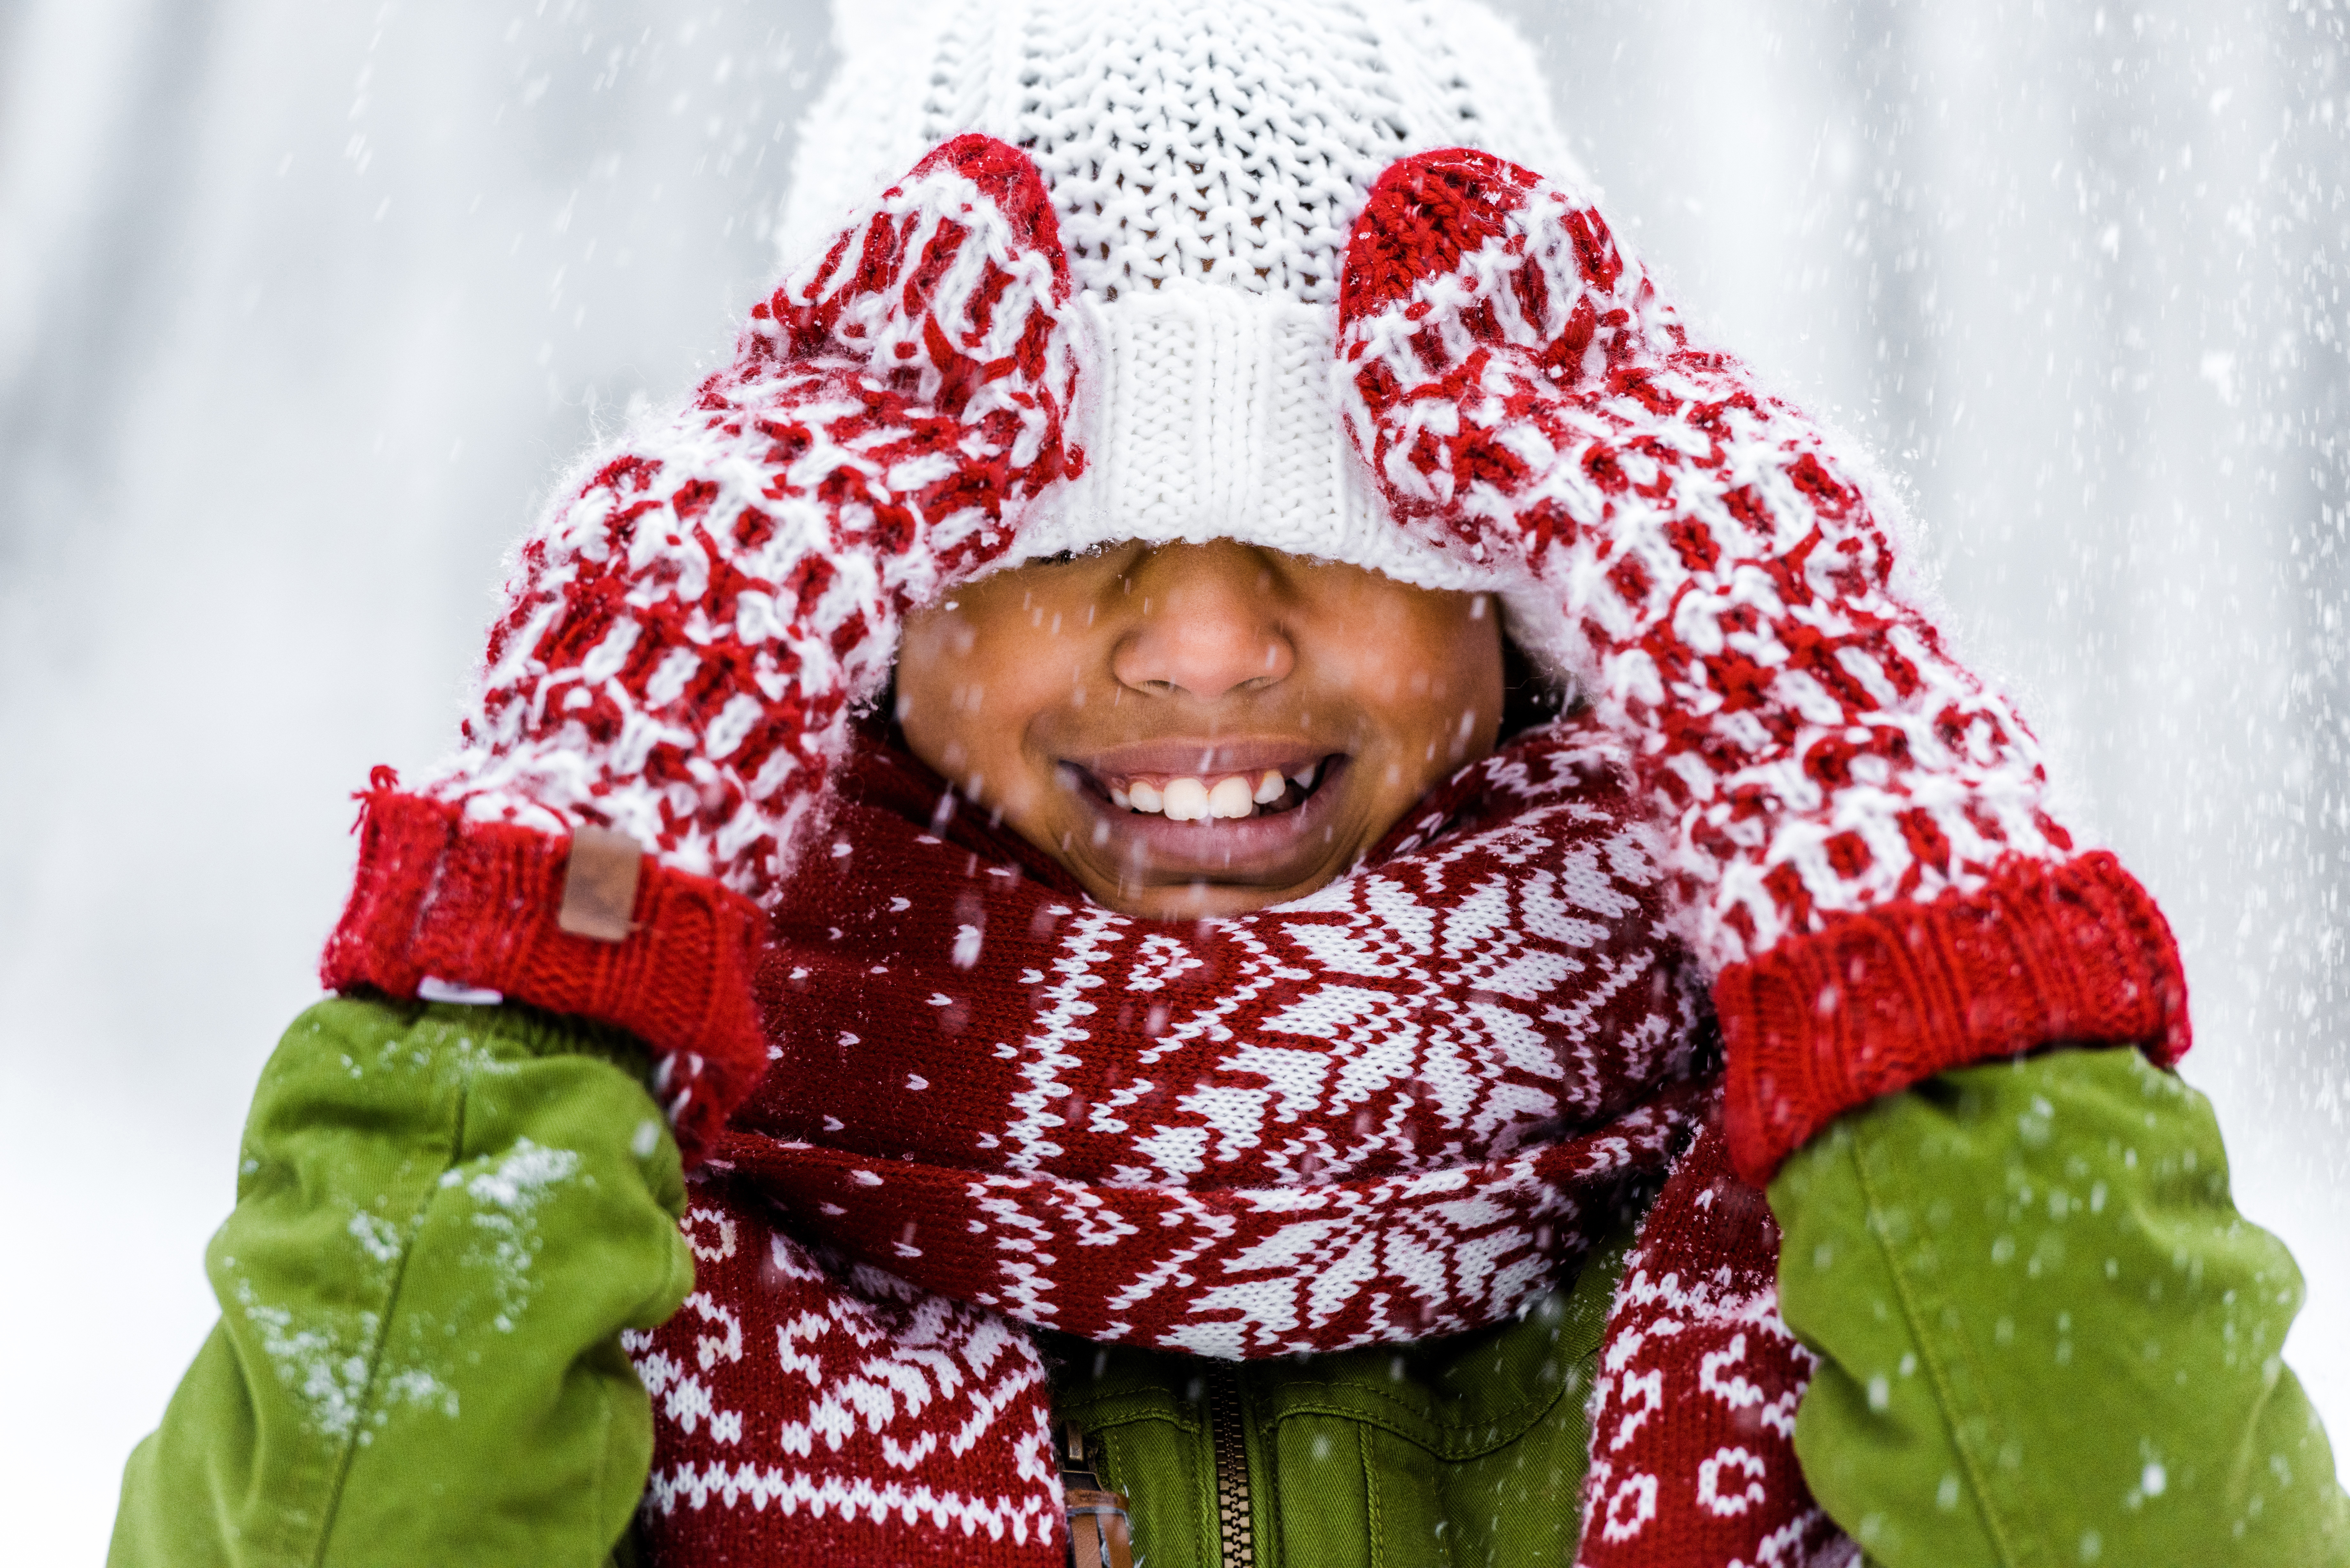 Cute African American child with knitted hat pulled over eyes smiling during snowfall